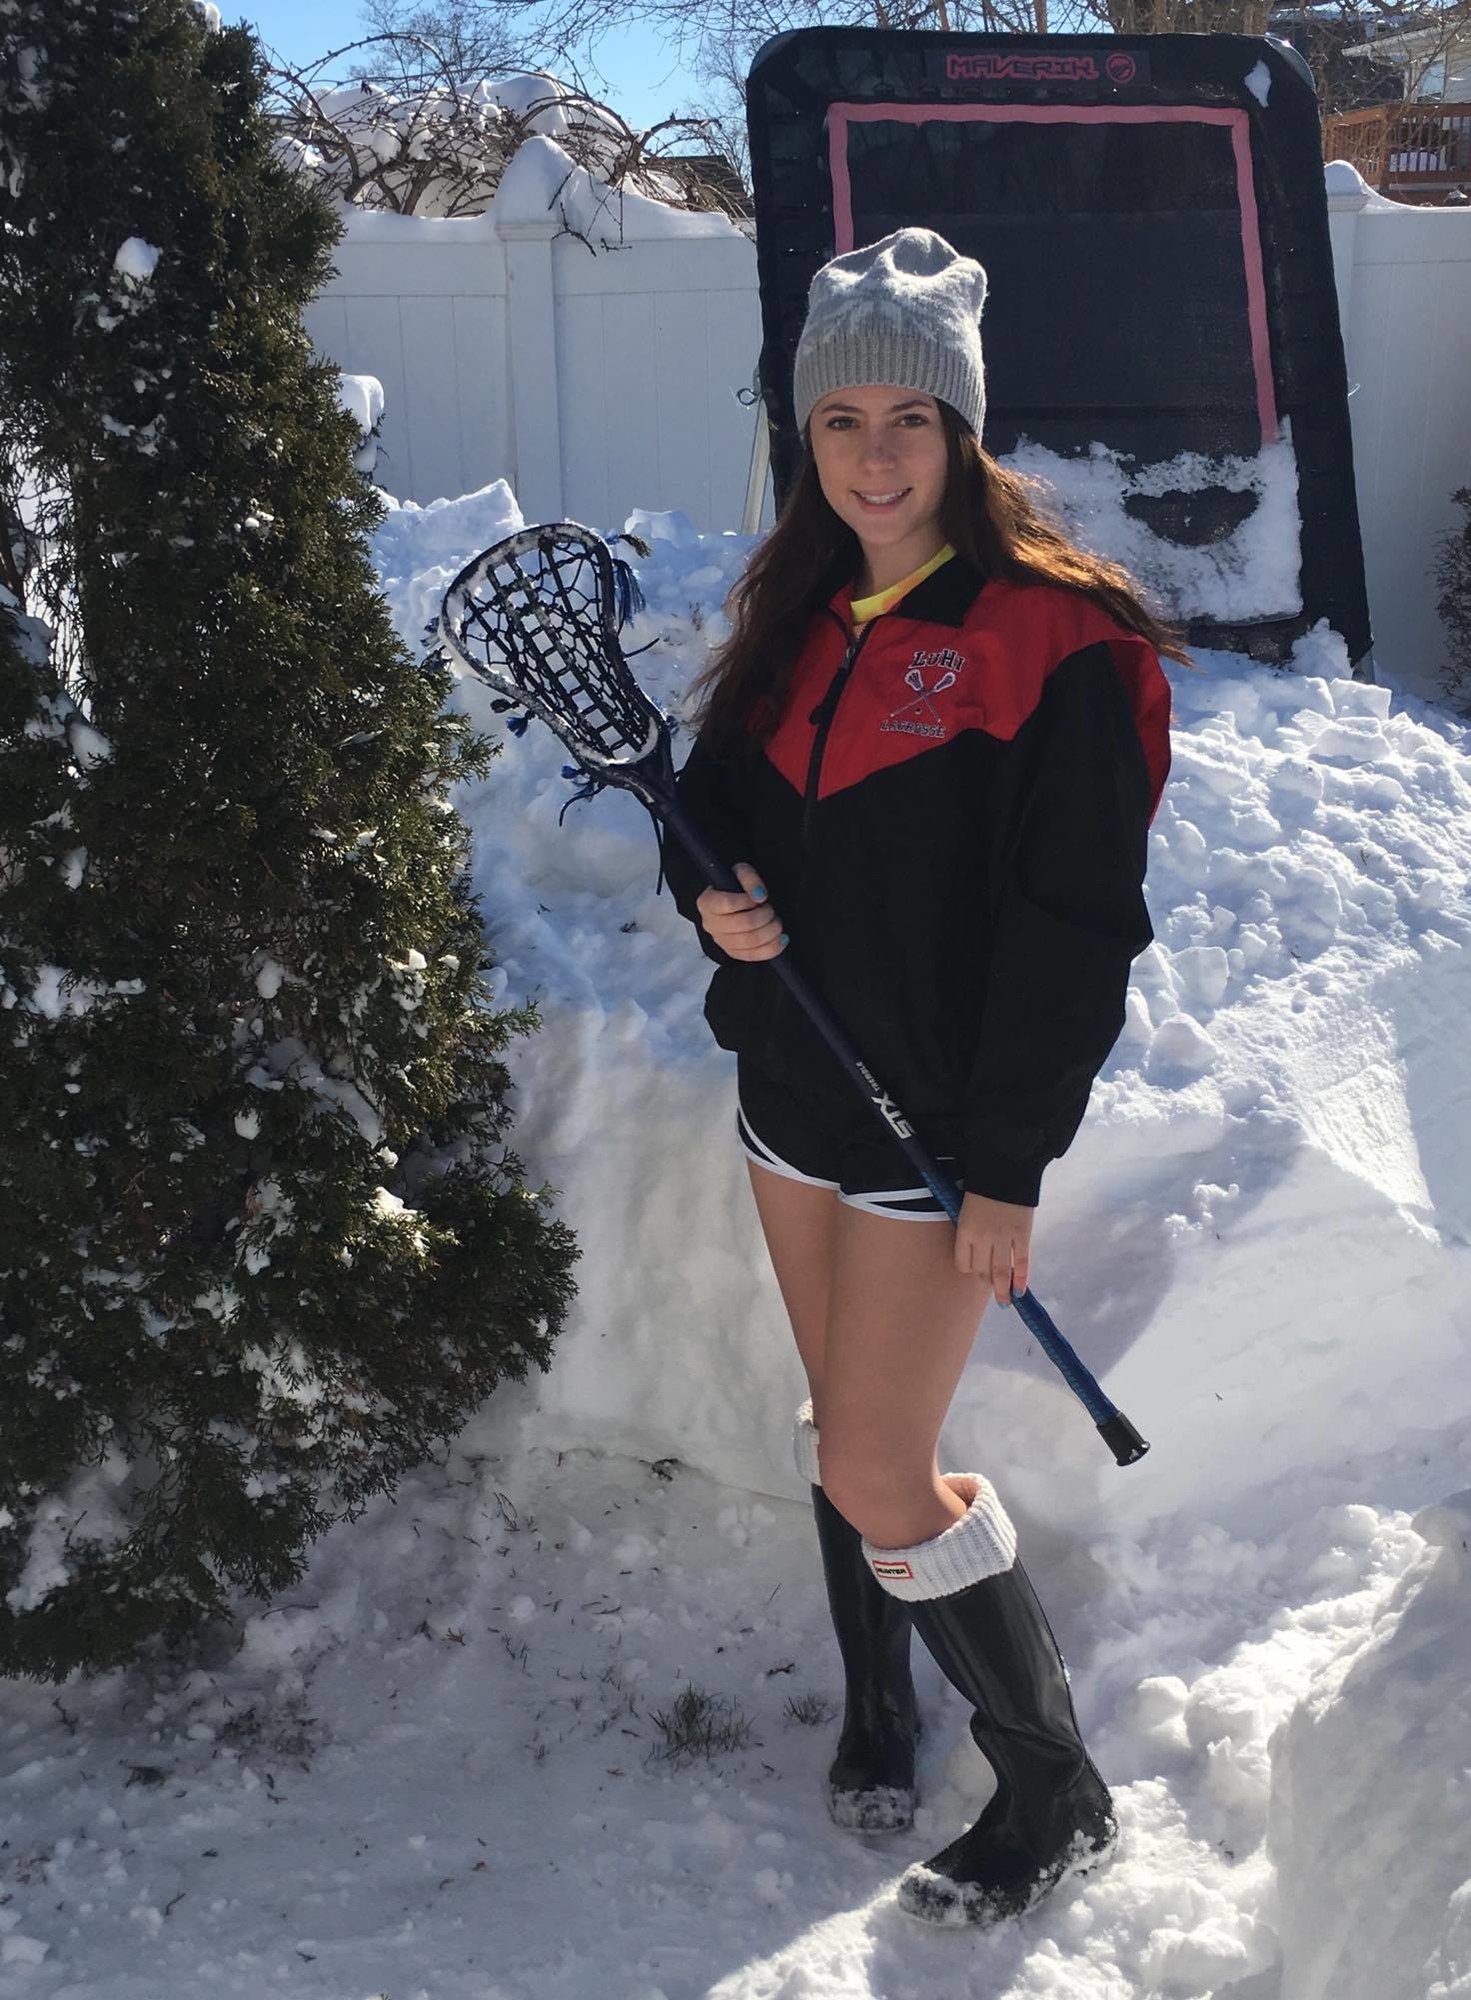 Gianna Serio, a sophomore at Long Island Lutheran High School, has not let the snow keep her from practicing lacrosse at her house in Franklin Square.